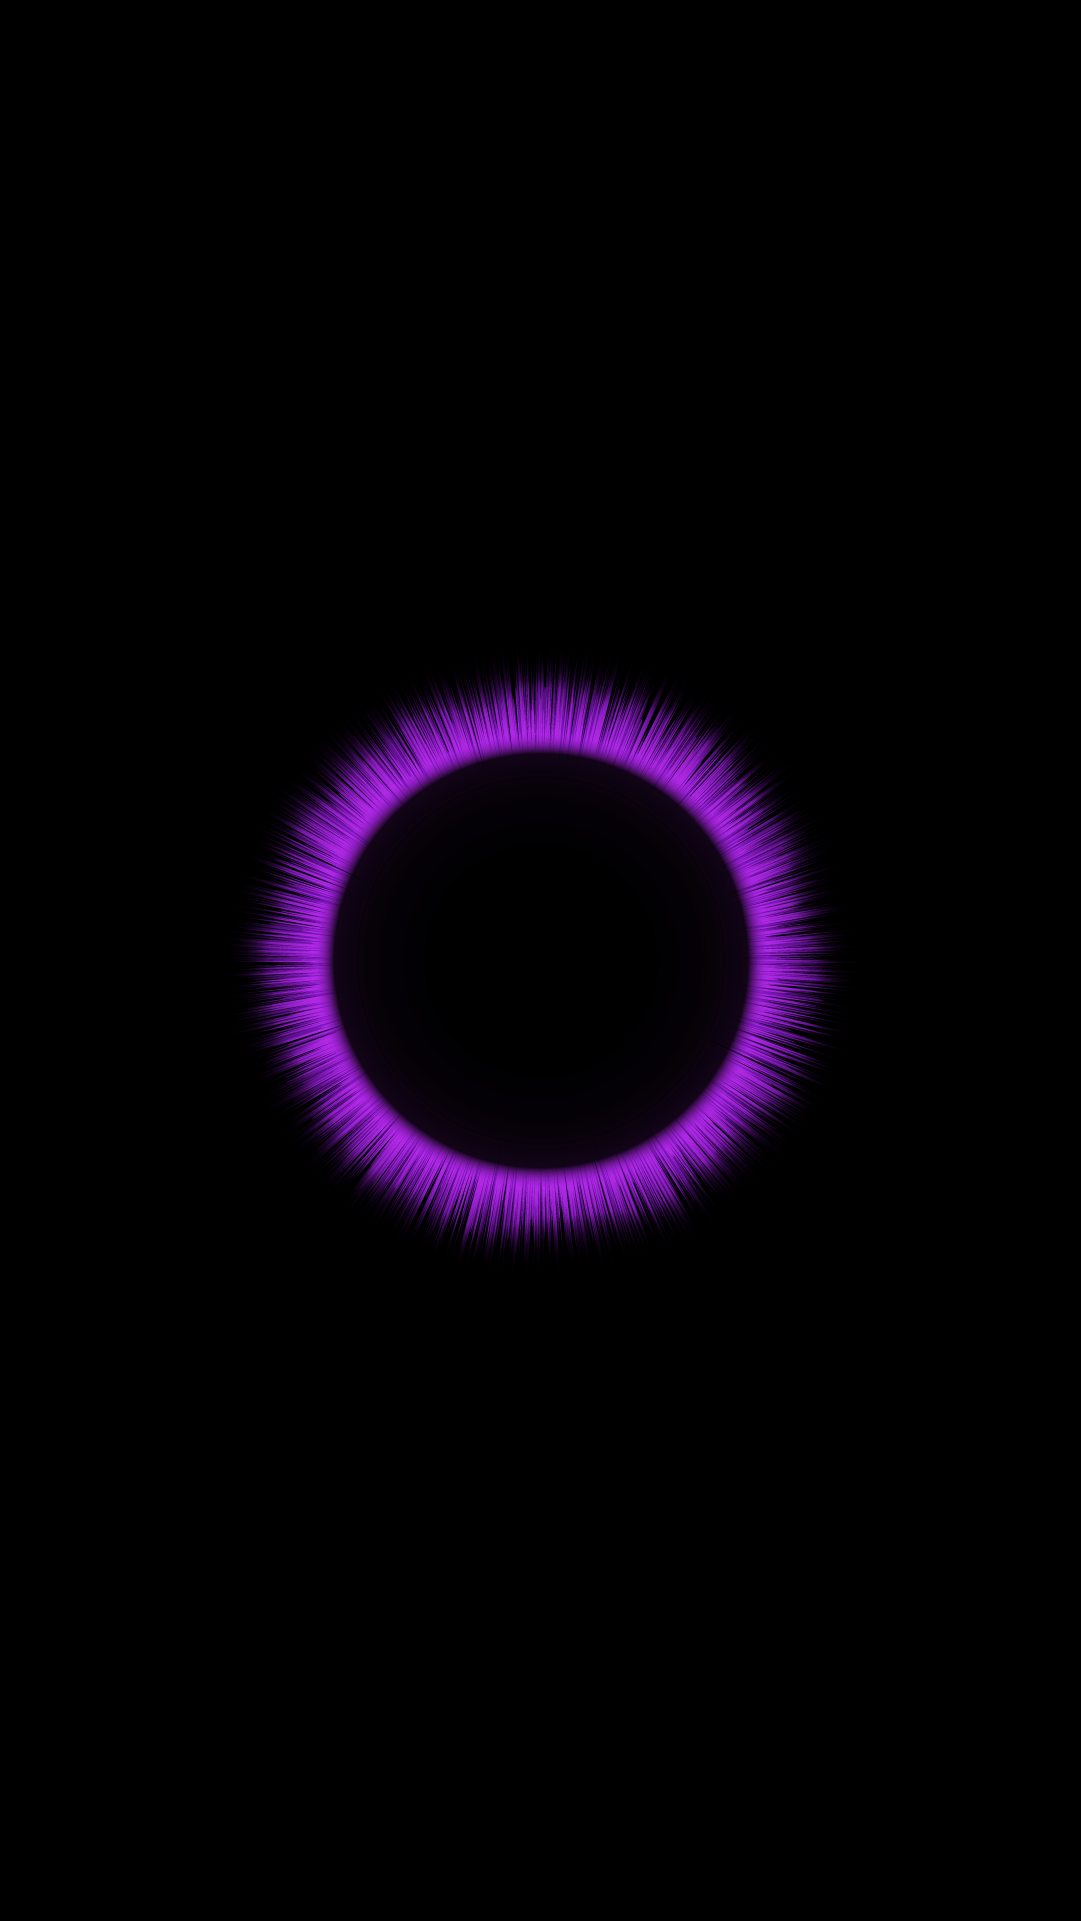 Just made a Full Eclipse aesthetic wallpaper [1080x1920]. Also this is my first contribution here